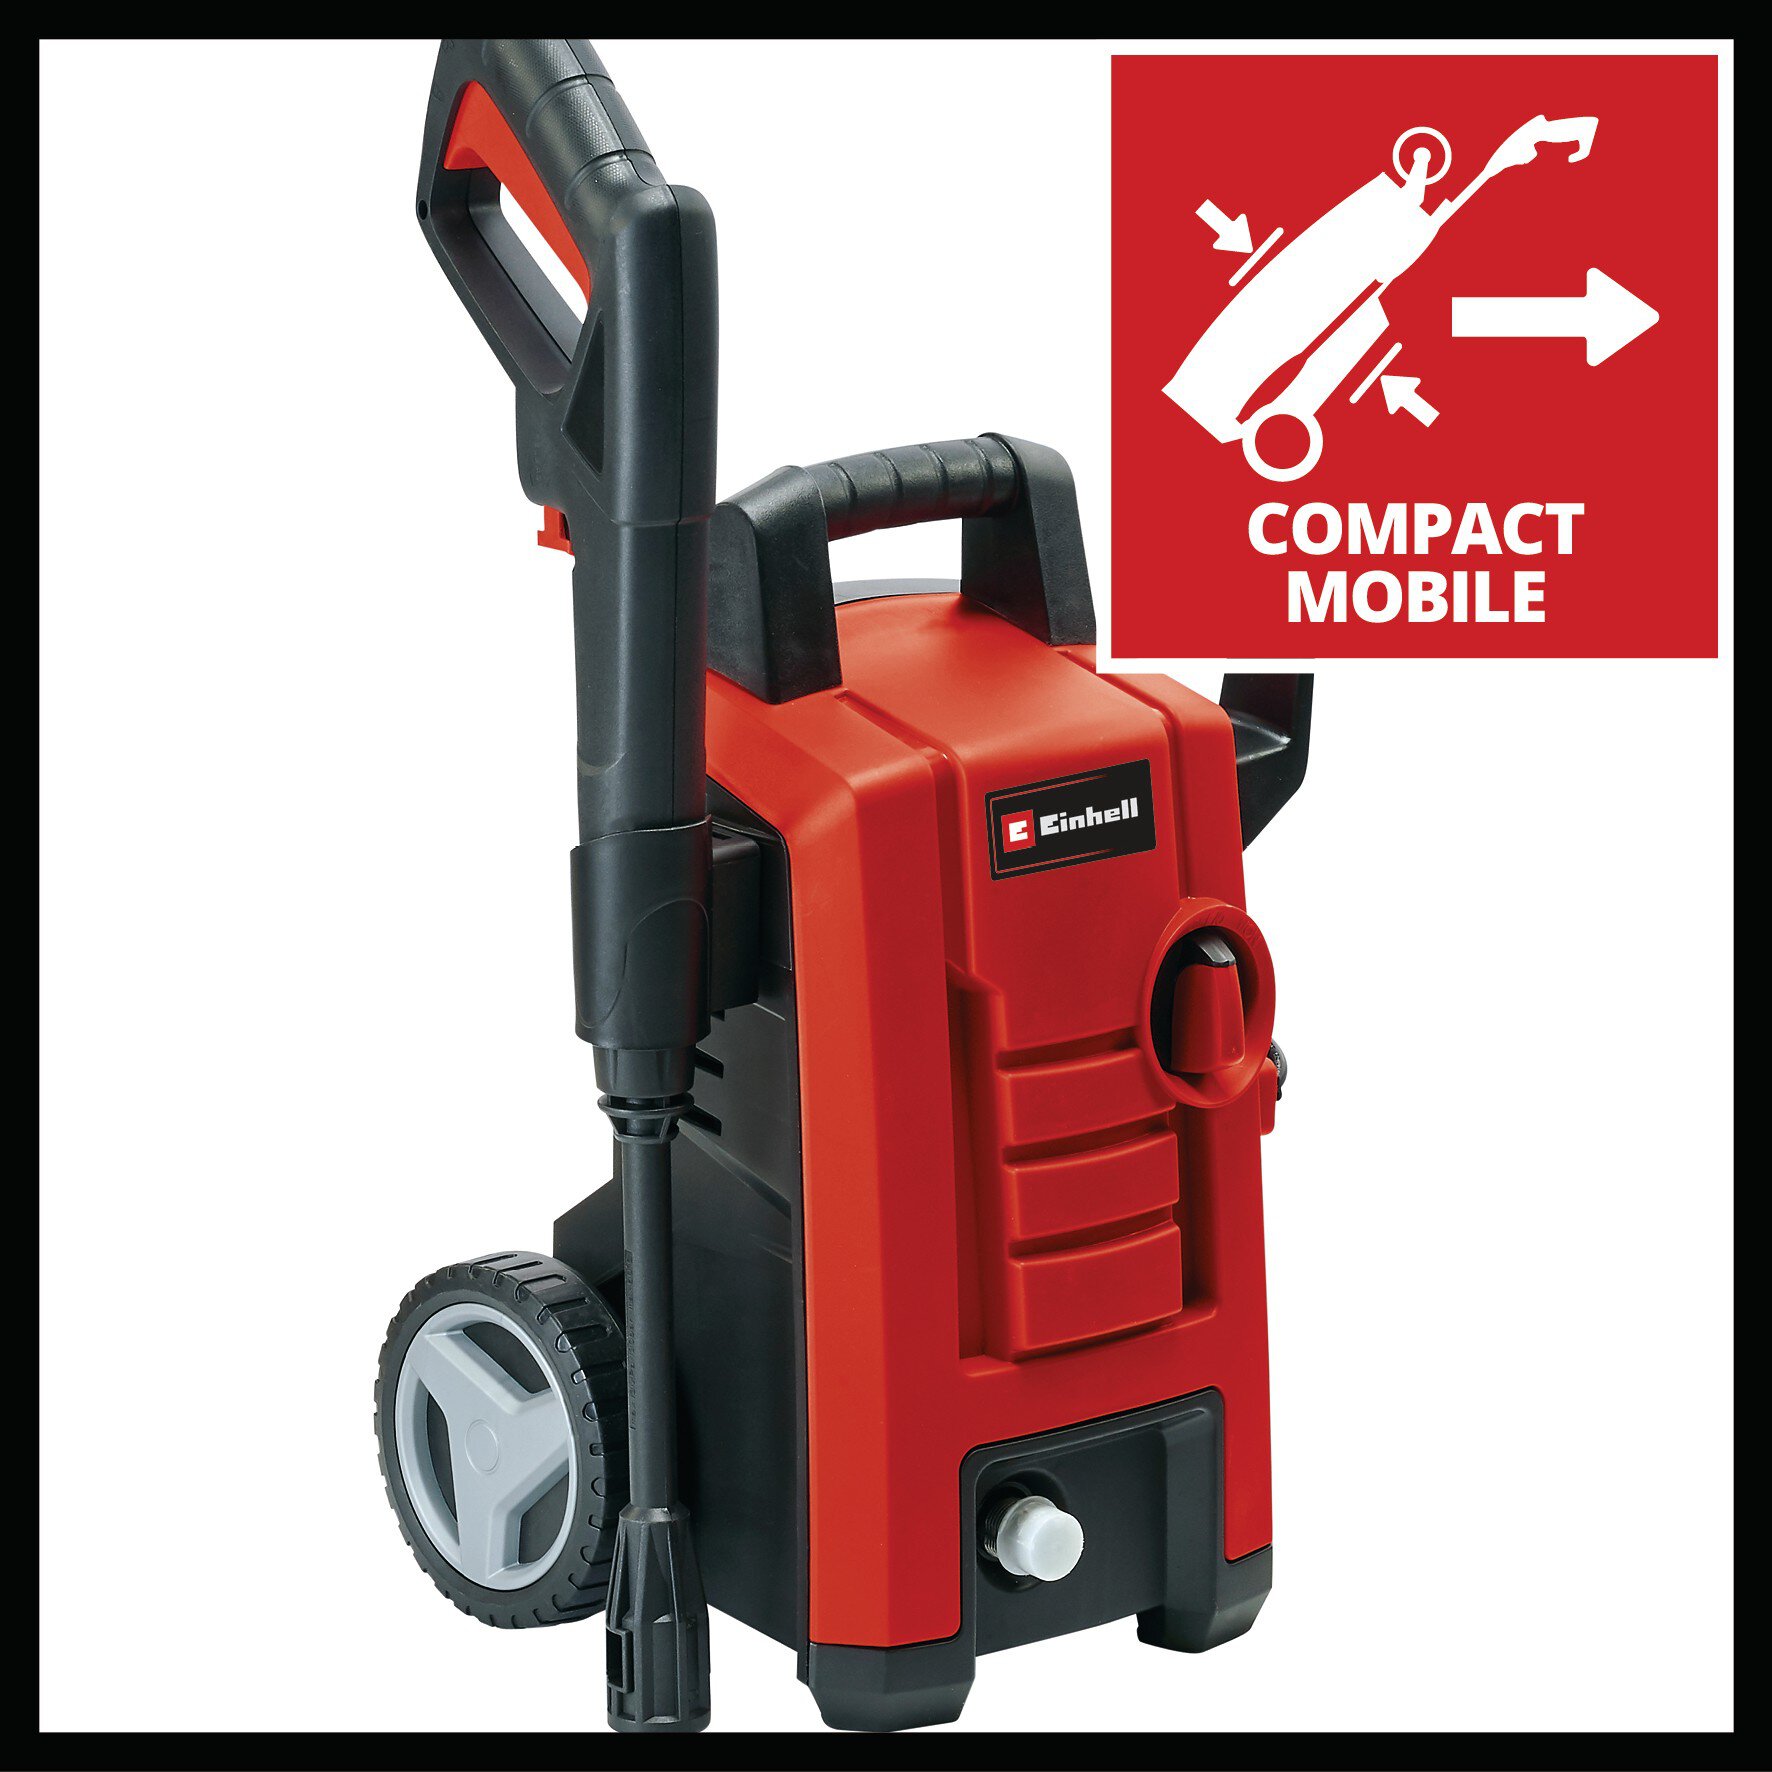 einhell-classic-high-pressure-cleaner-4140750-detail_image-001